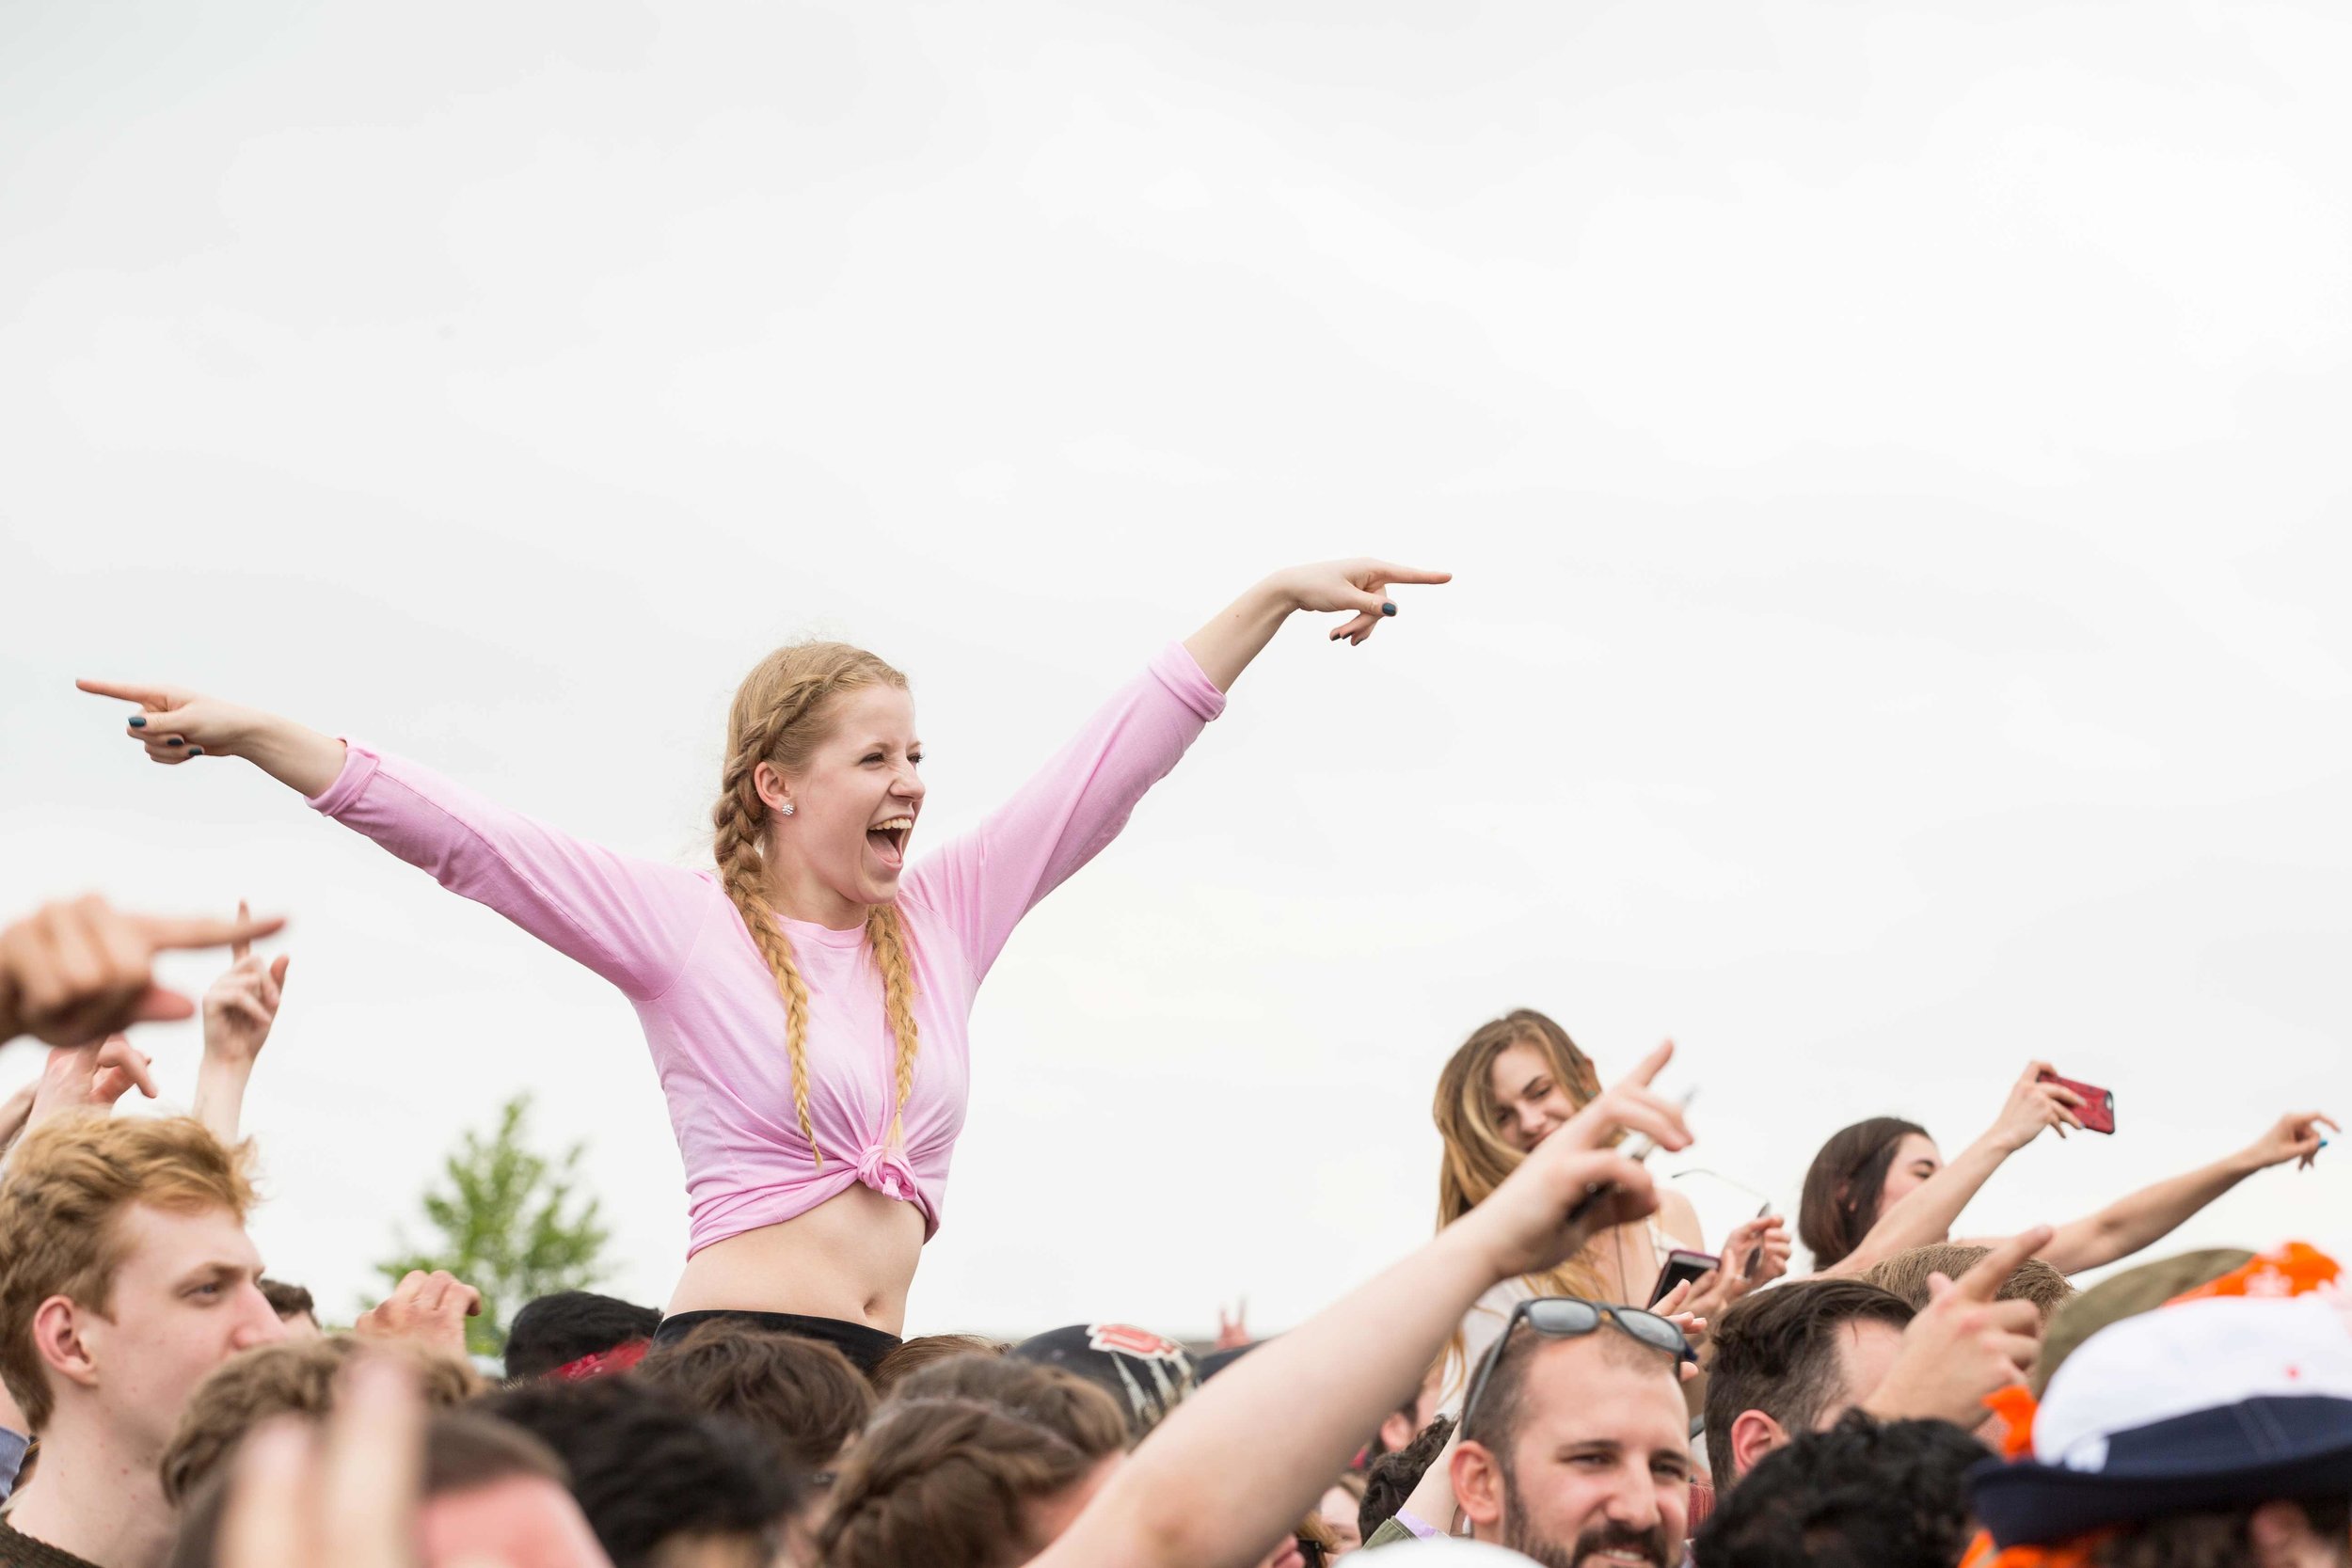 Chicago Event Photography - Concert goer enjoying the band